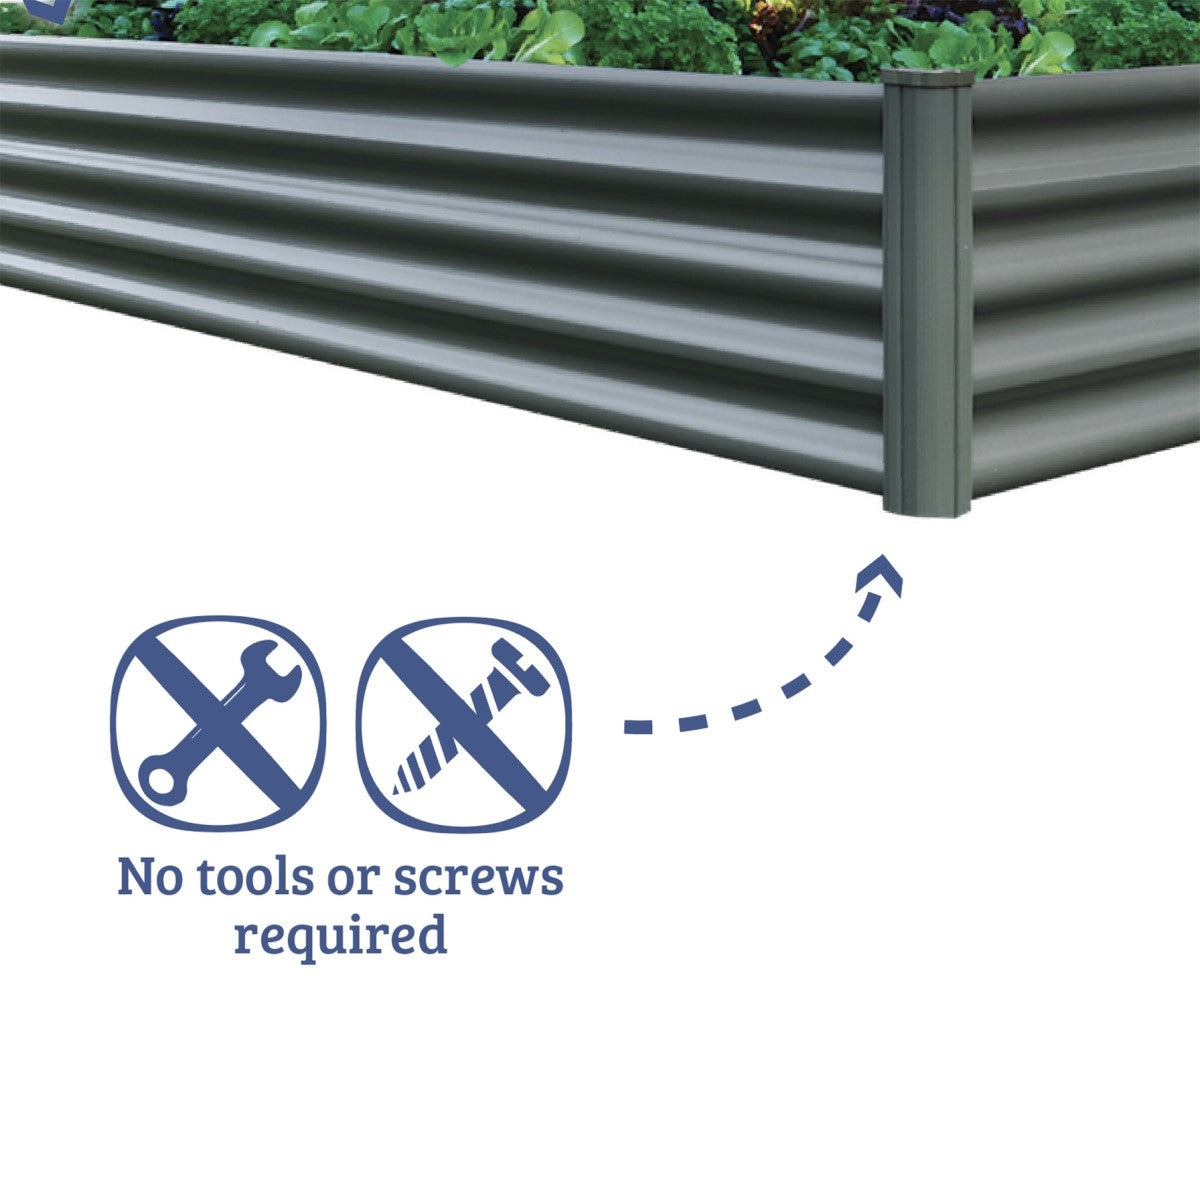 Absco | 4x4x1 ft L Shaped Raised Garden Bed